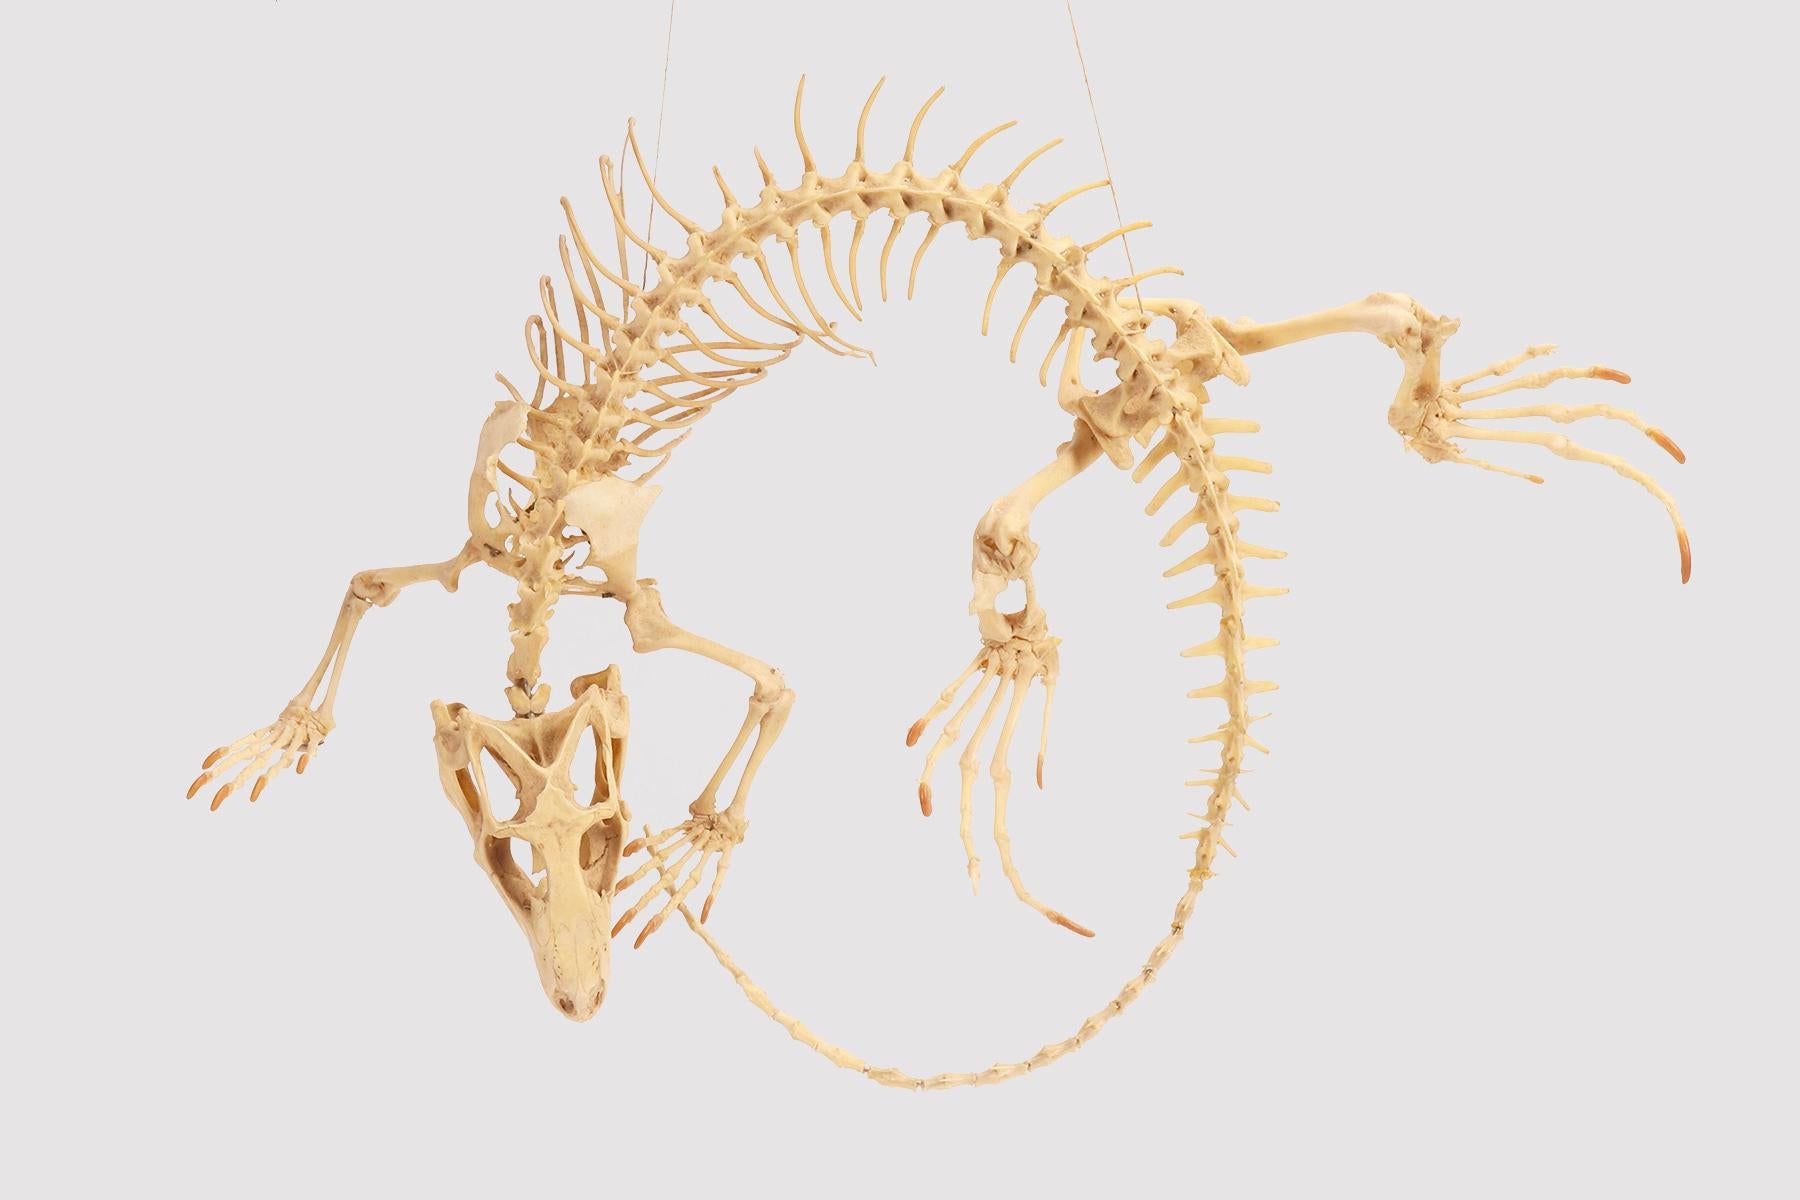 A natural specimen of an iguana skeleton from the Wunderkammer The specimen is twisted into a circle and hung from a string. Italy, circa 1890.